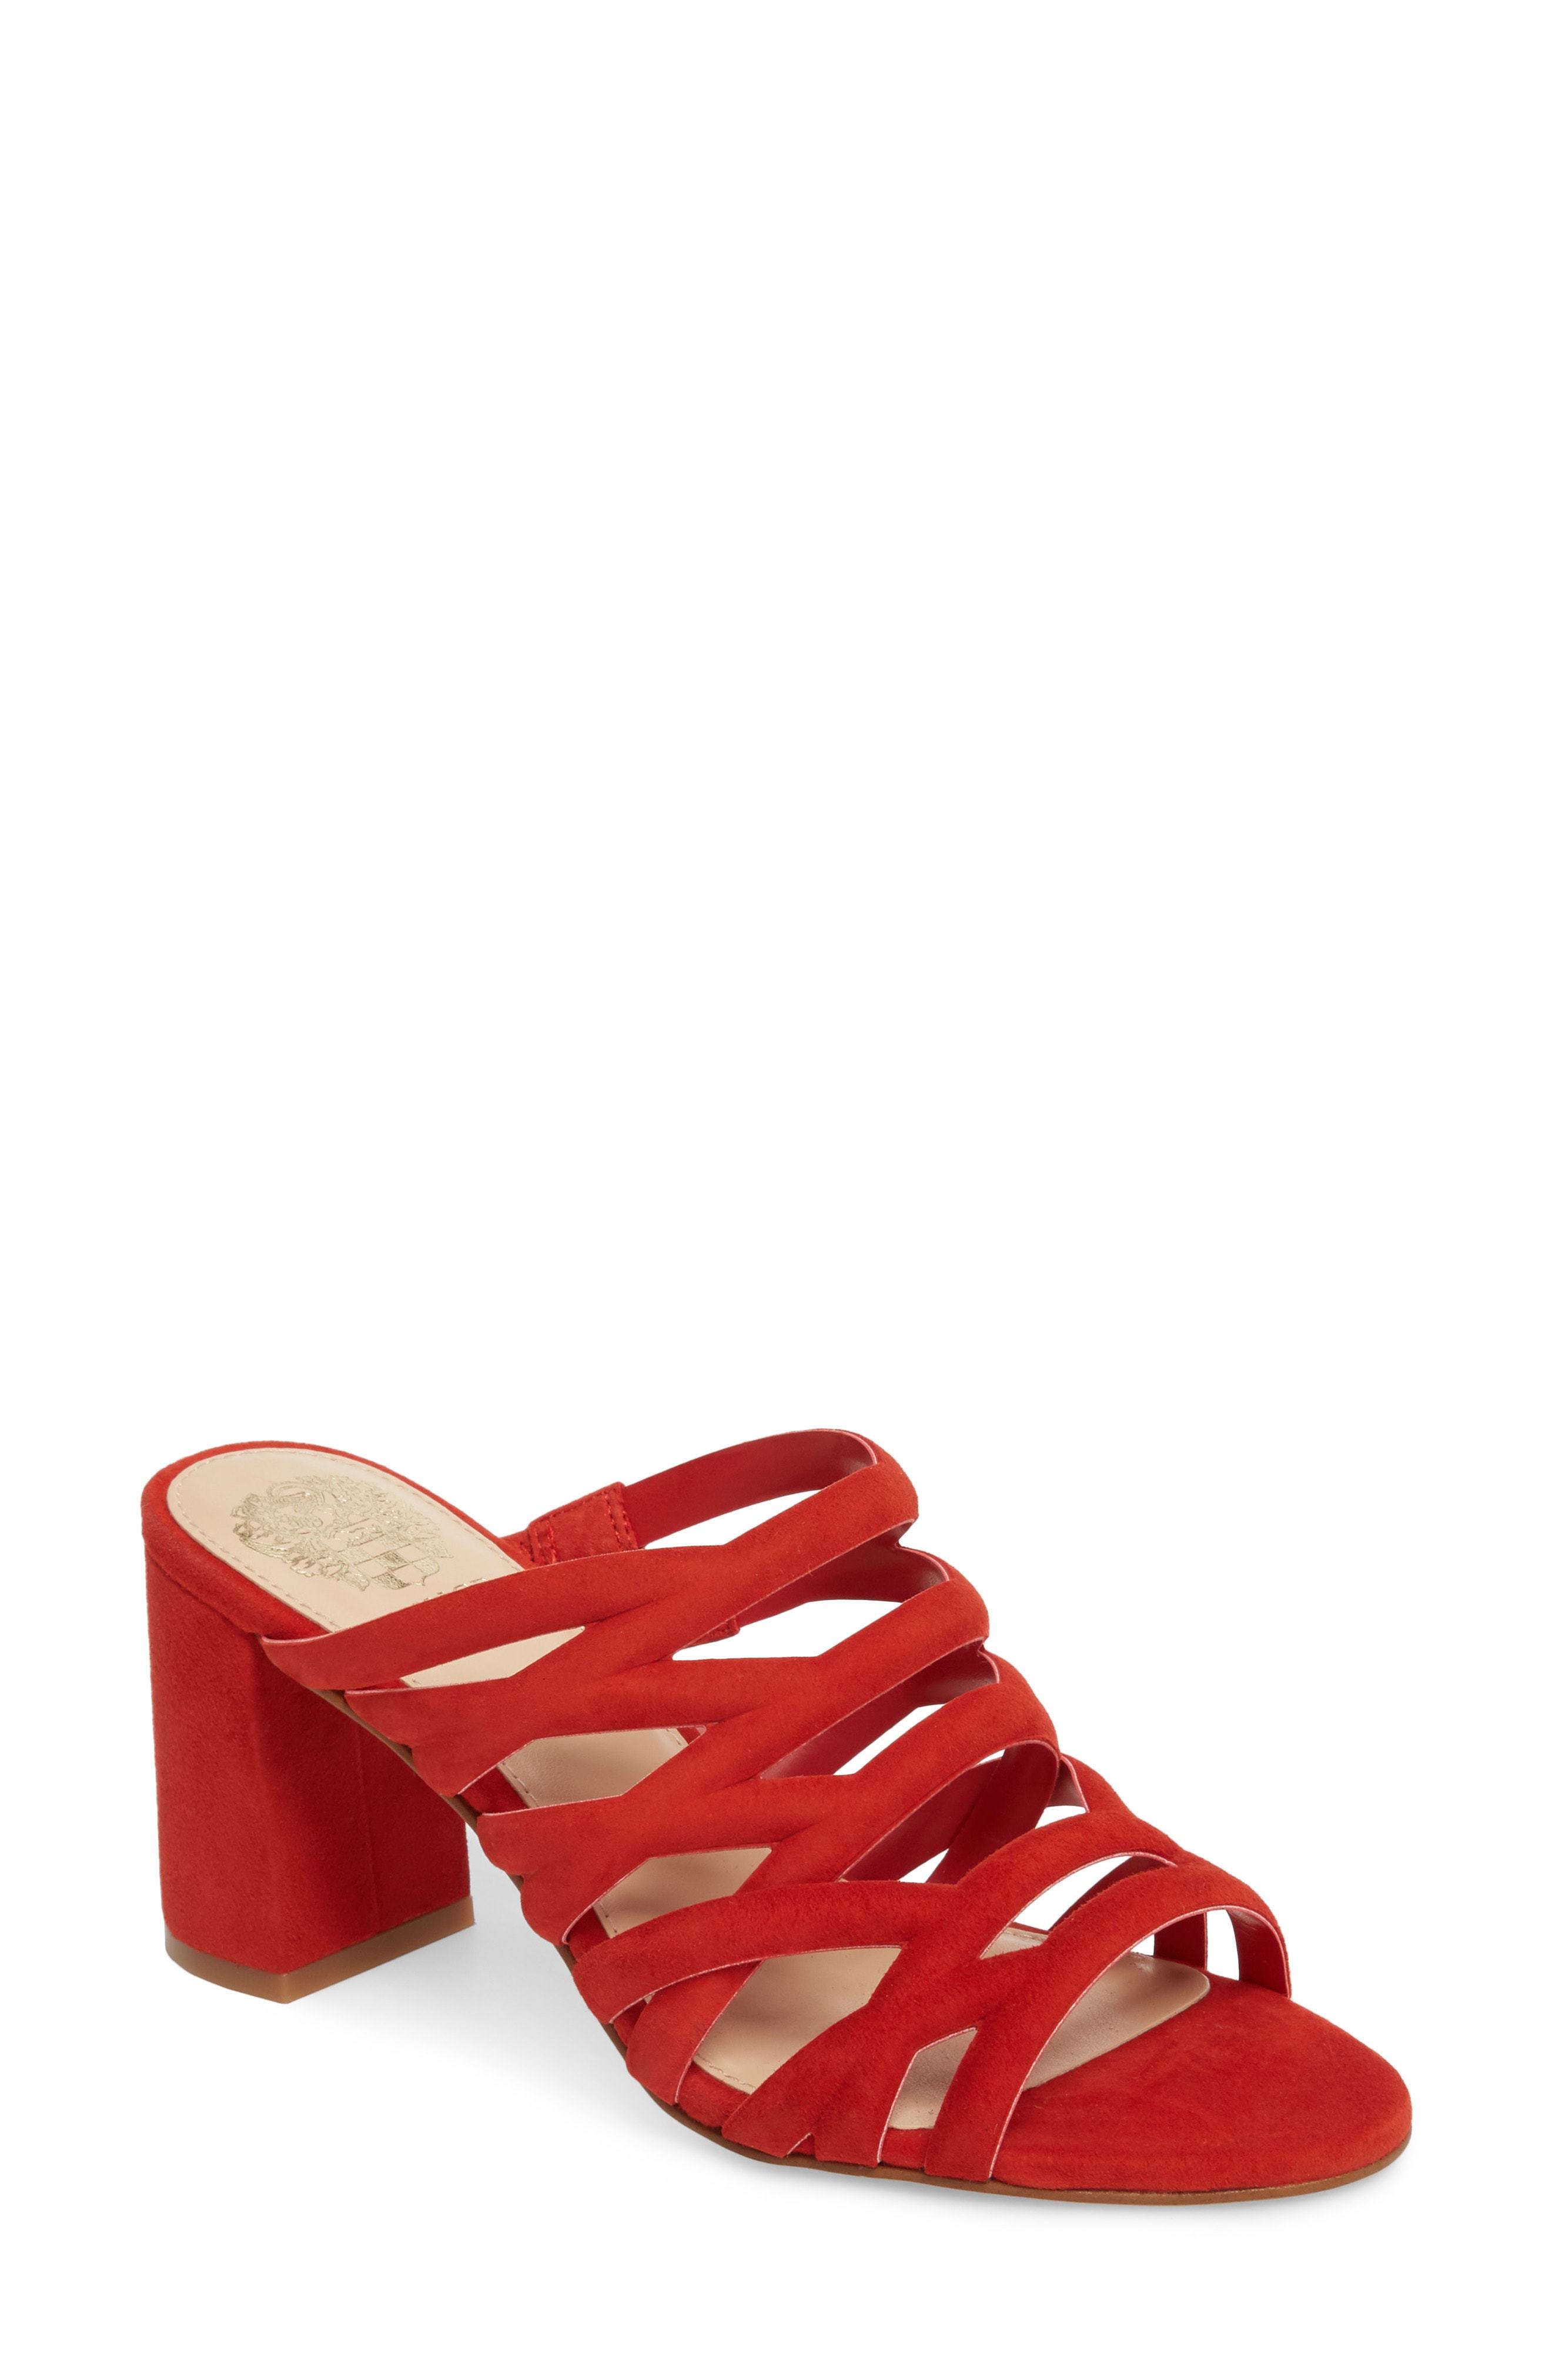 vince camuto red mules